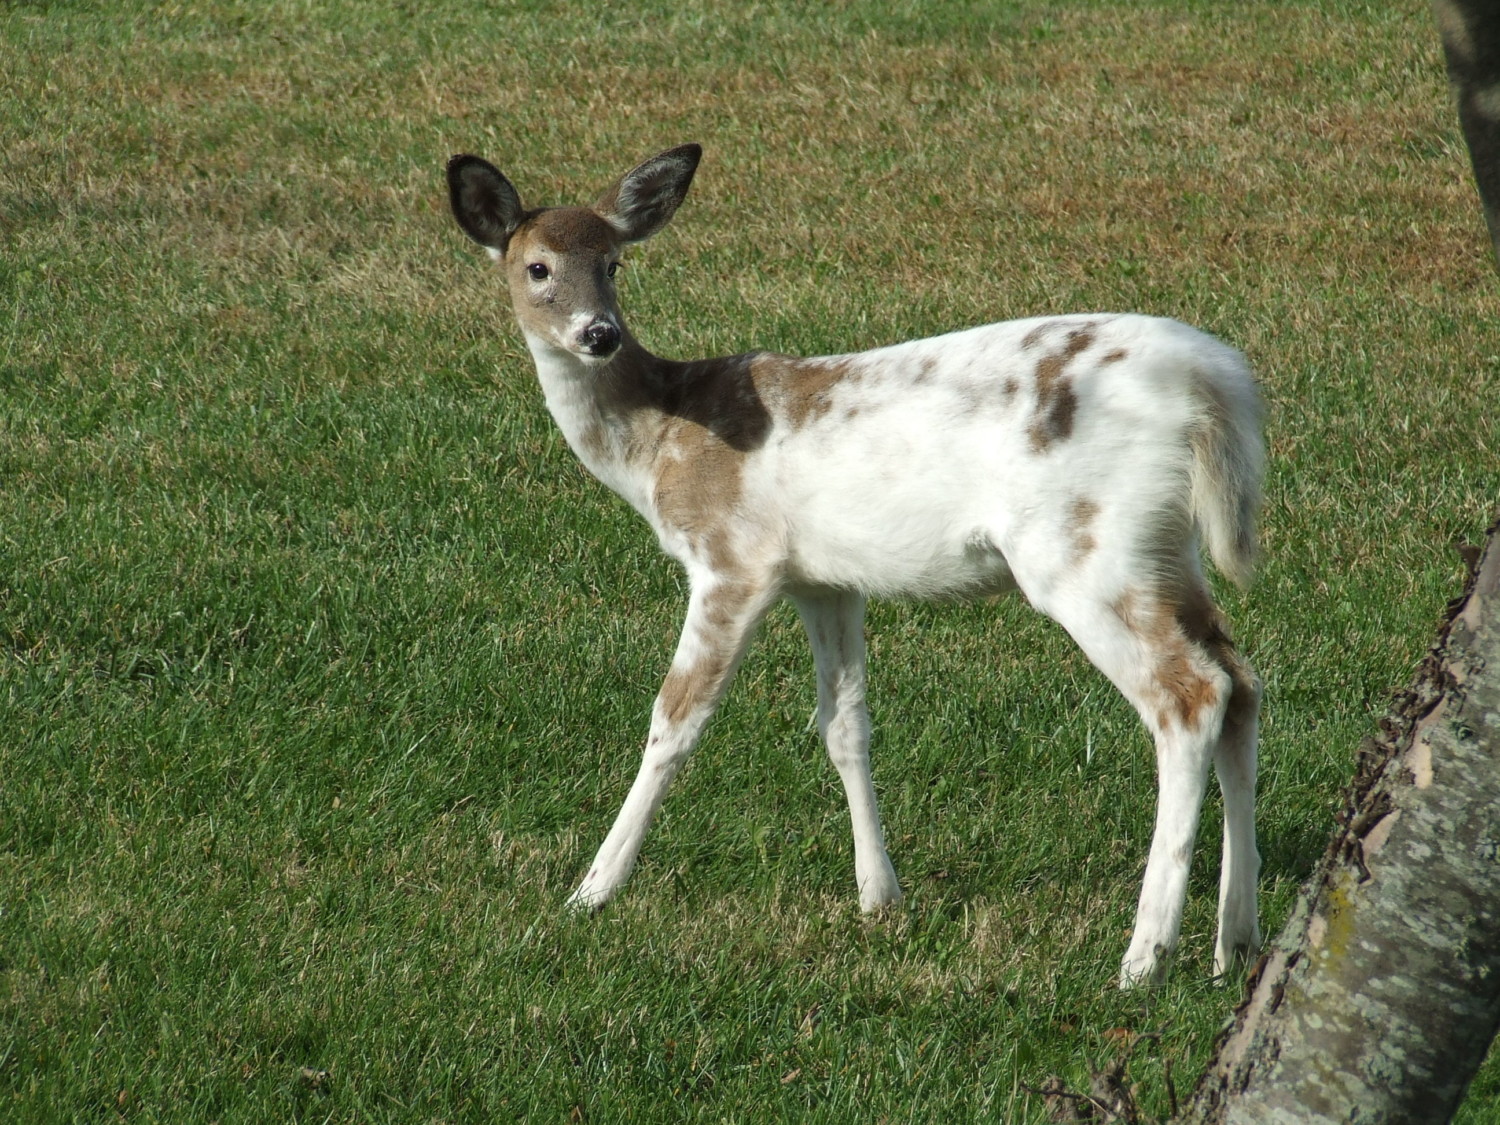 how did the piebald get its name and where does the word piebald come from